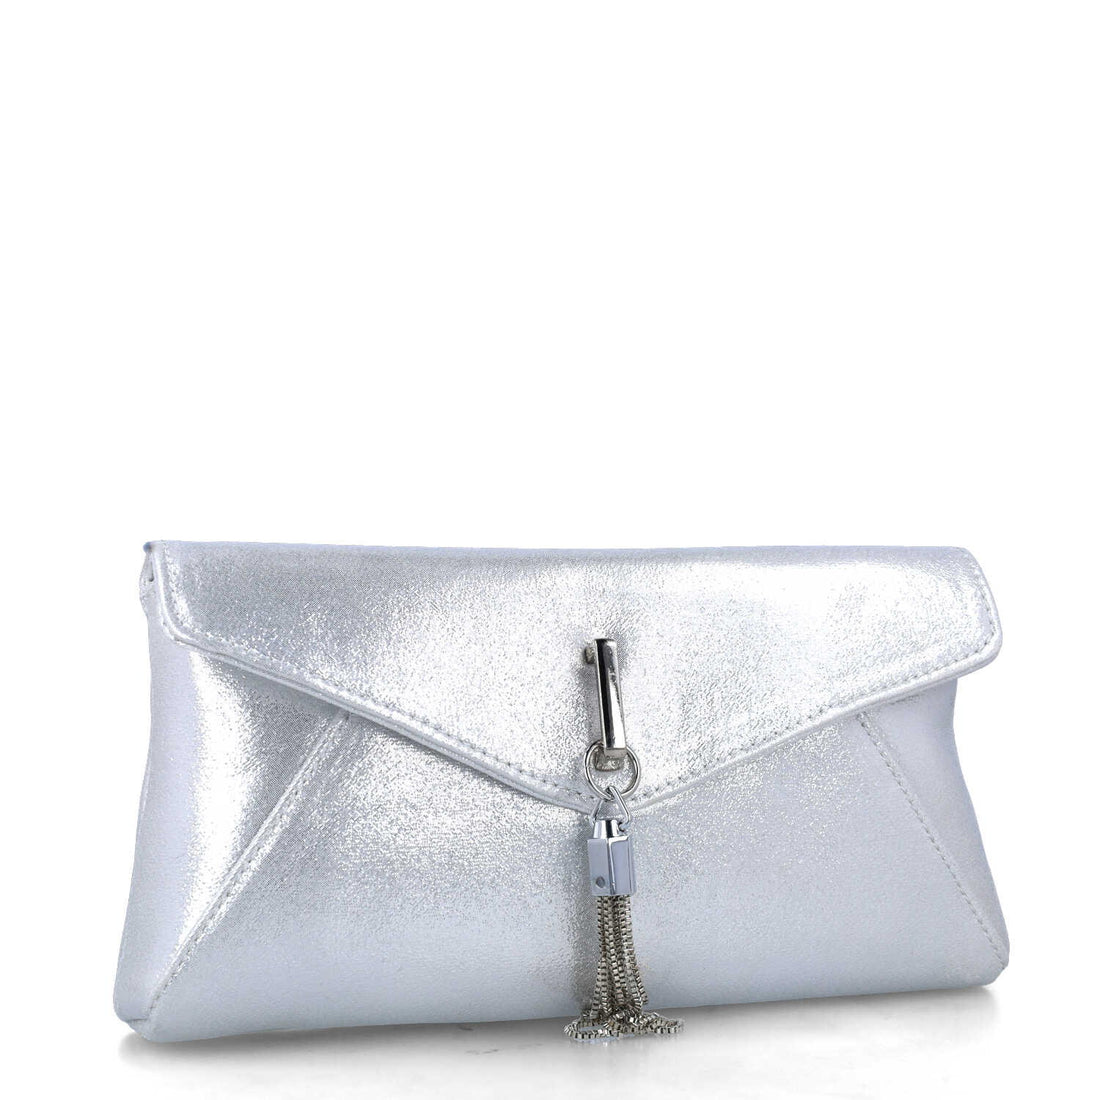 Silver Embellished Clutch With Shimmer_85698_09_02